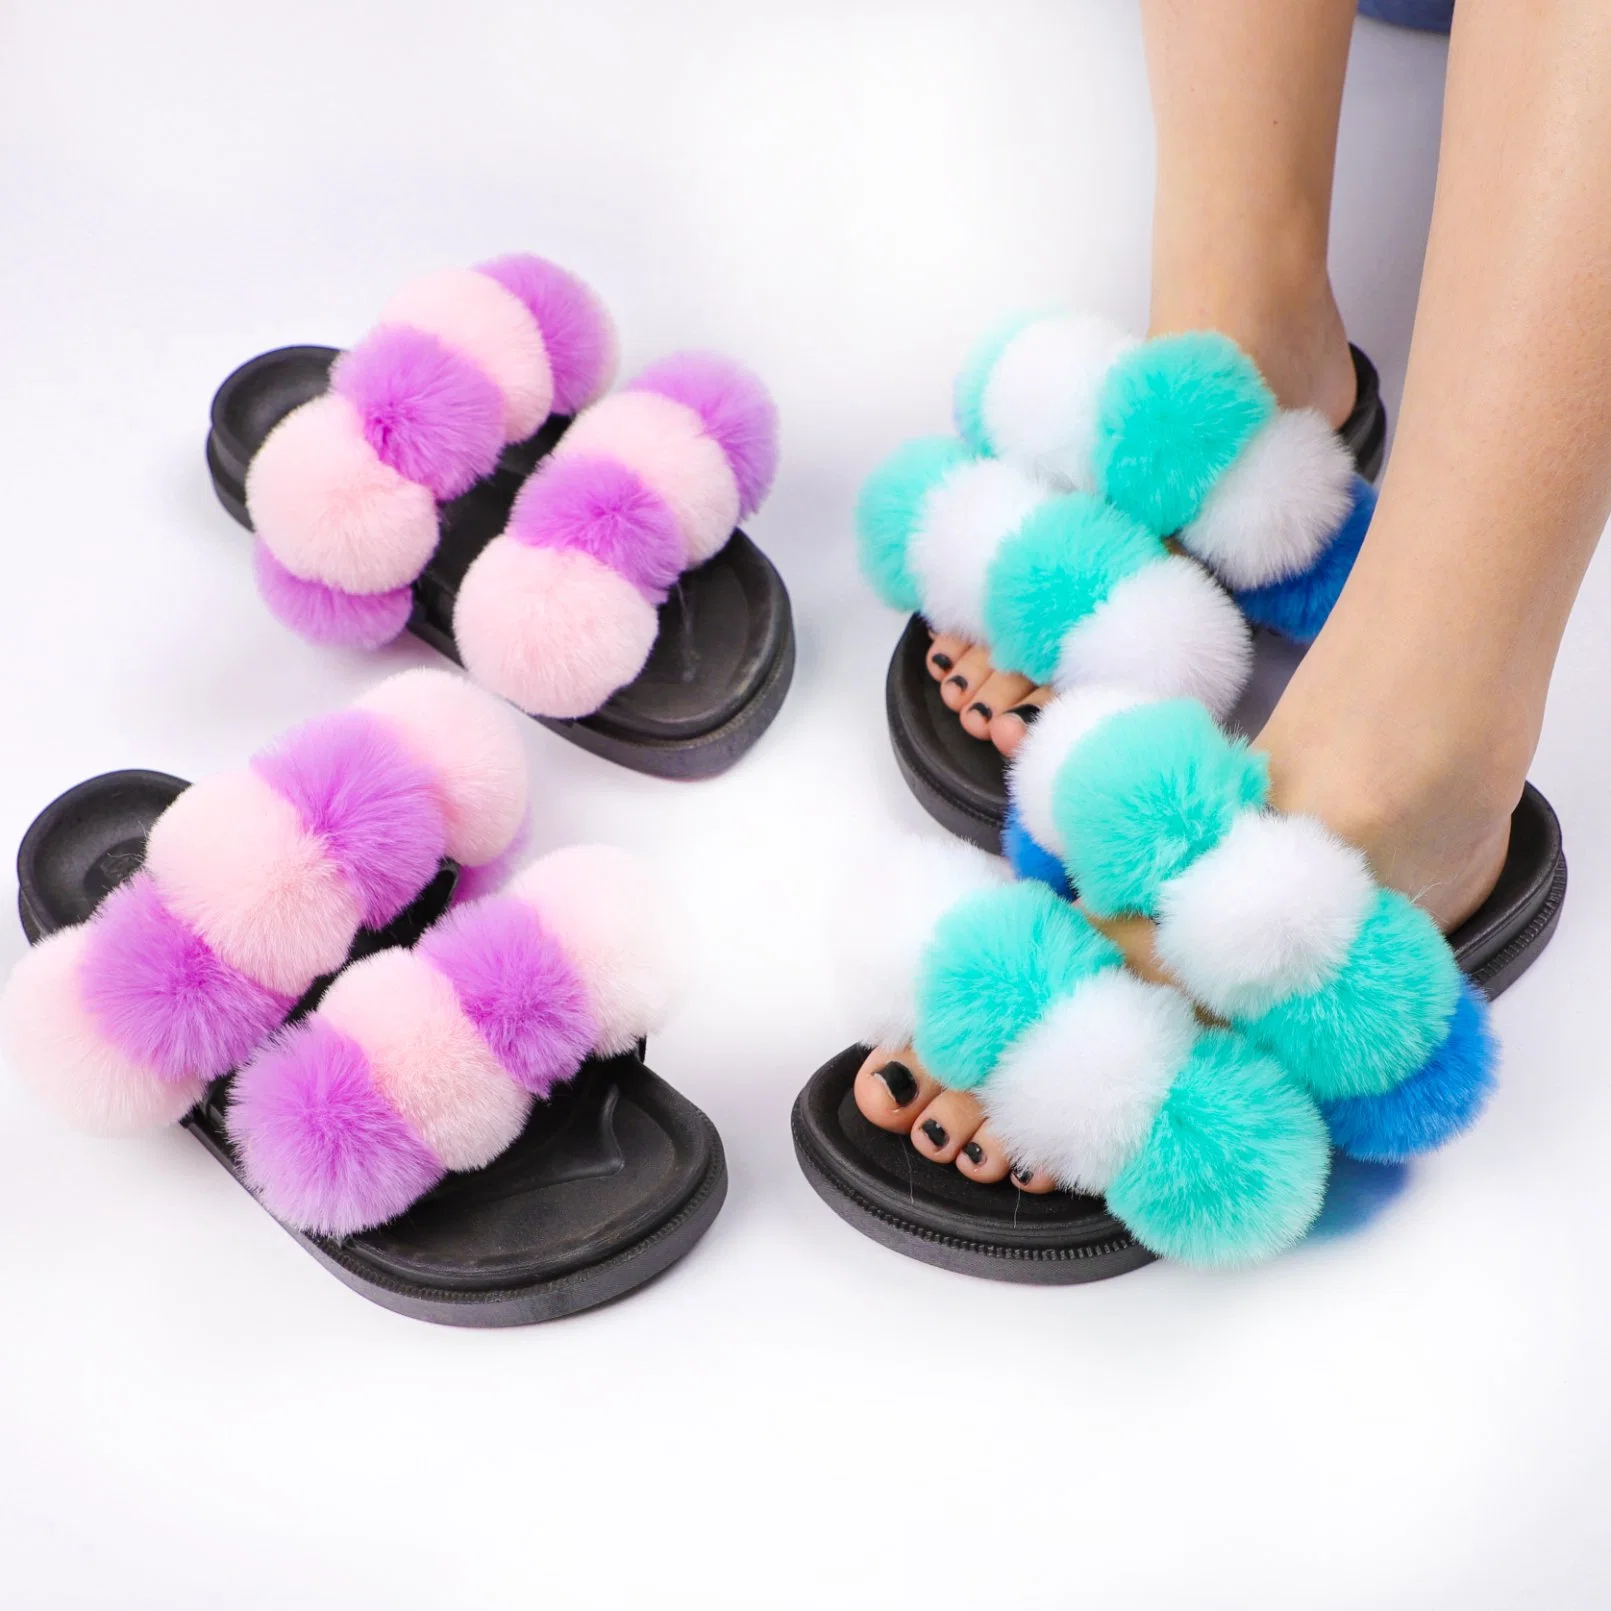 2021 Women Shoes Lady House Bedroom Indoor Home Winter Warm Fox Faux Fur Fluffy Furry Plush Fuzzy Shoes 30 Colors